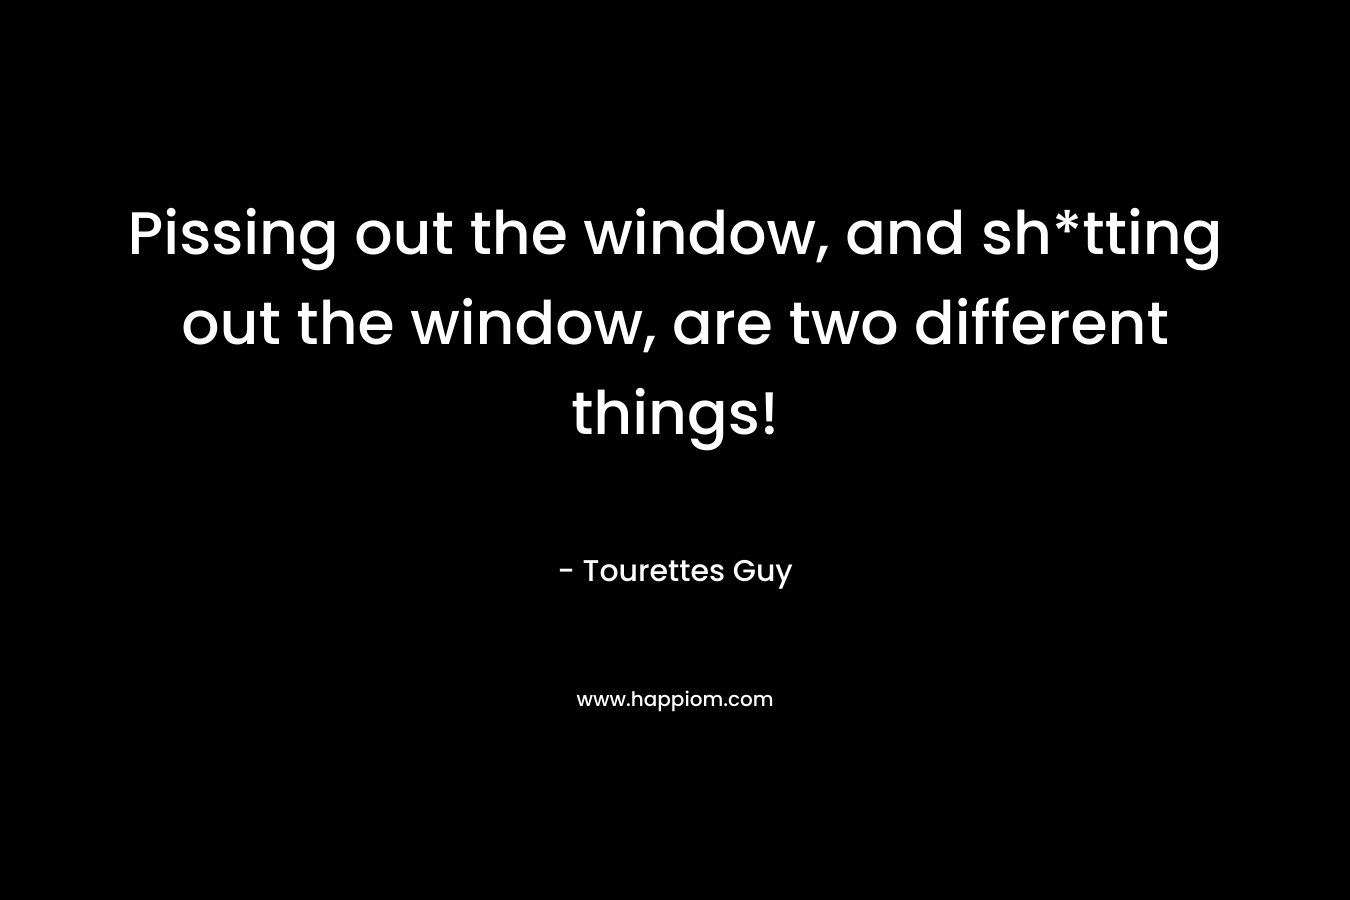 Pissing out the window, and sh*tting out the window, are two different things! – Tourettes Guy